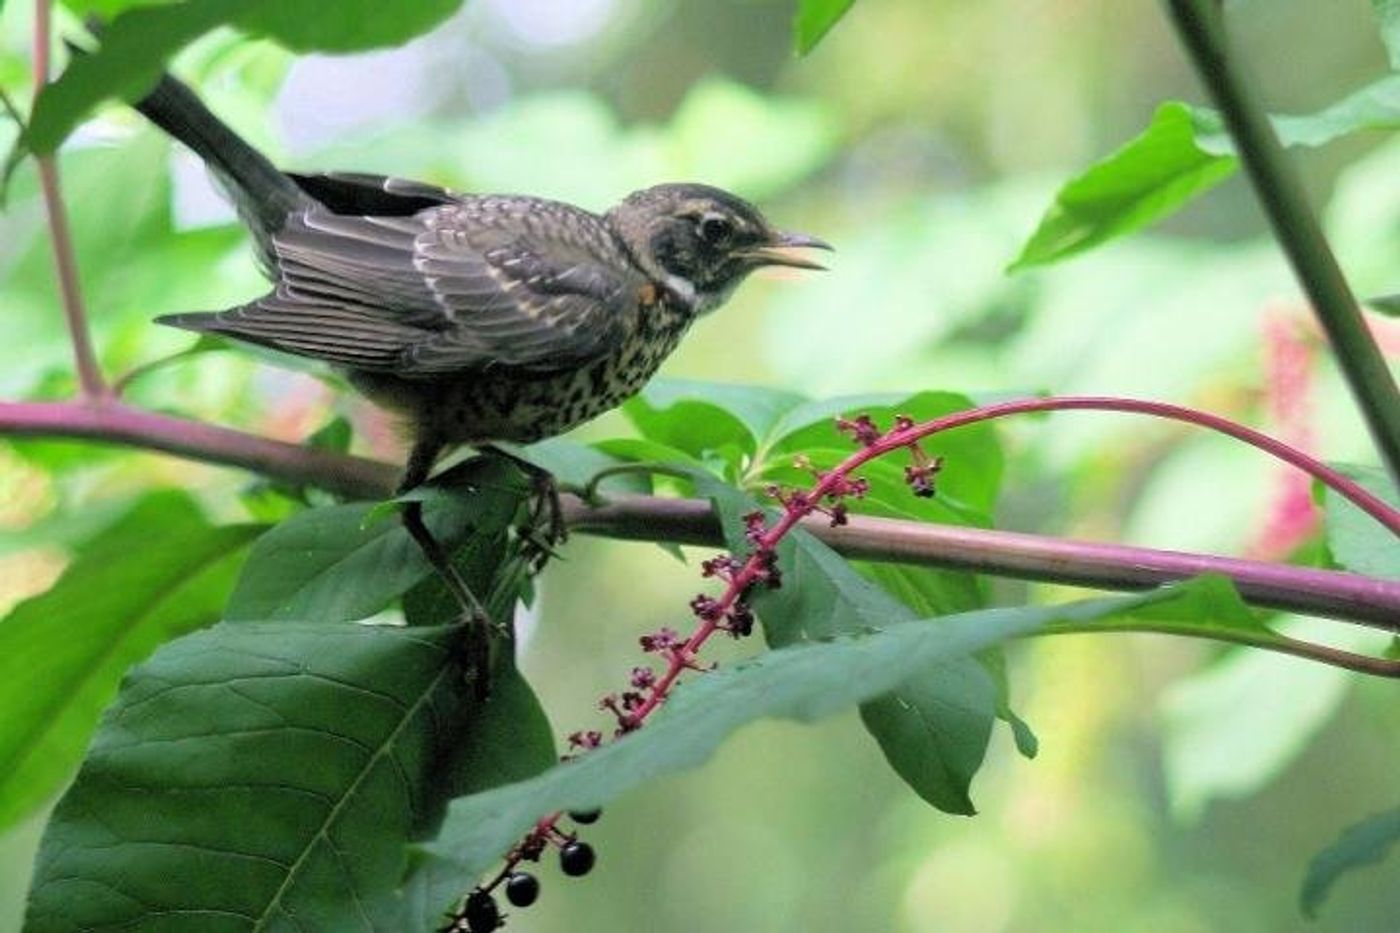 A robin munches on pokeweed berries in a Chicago backyard